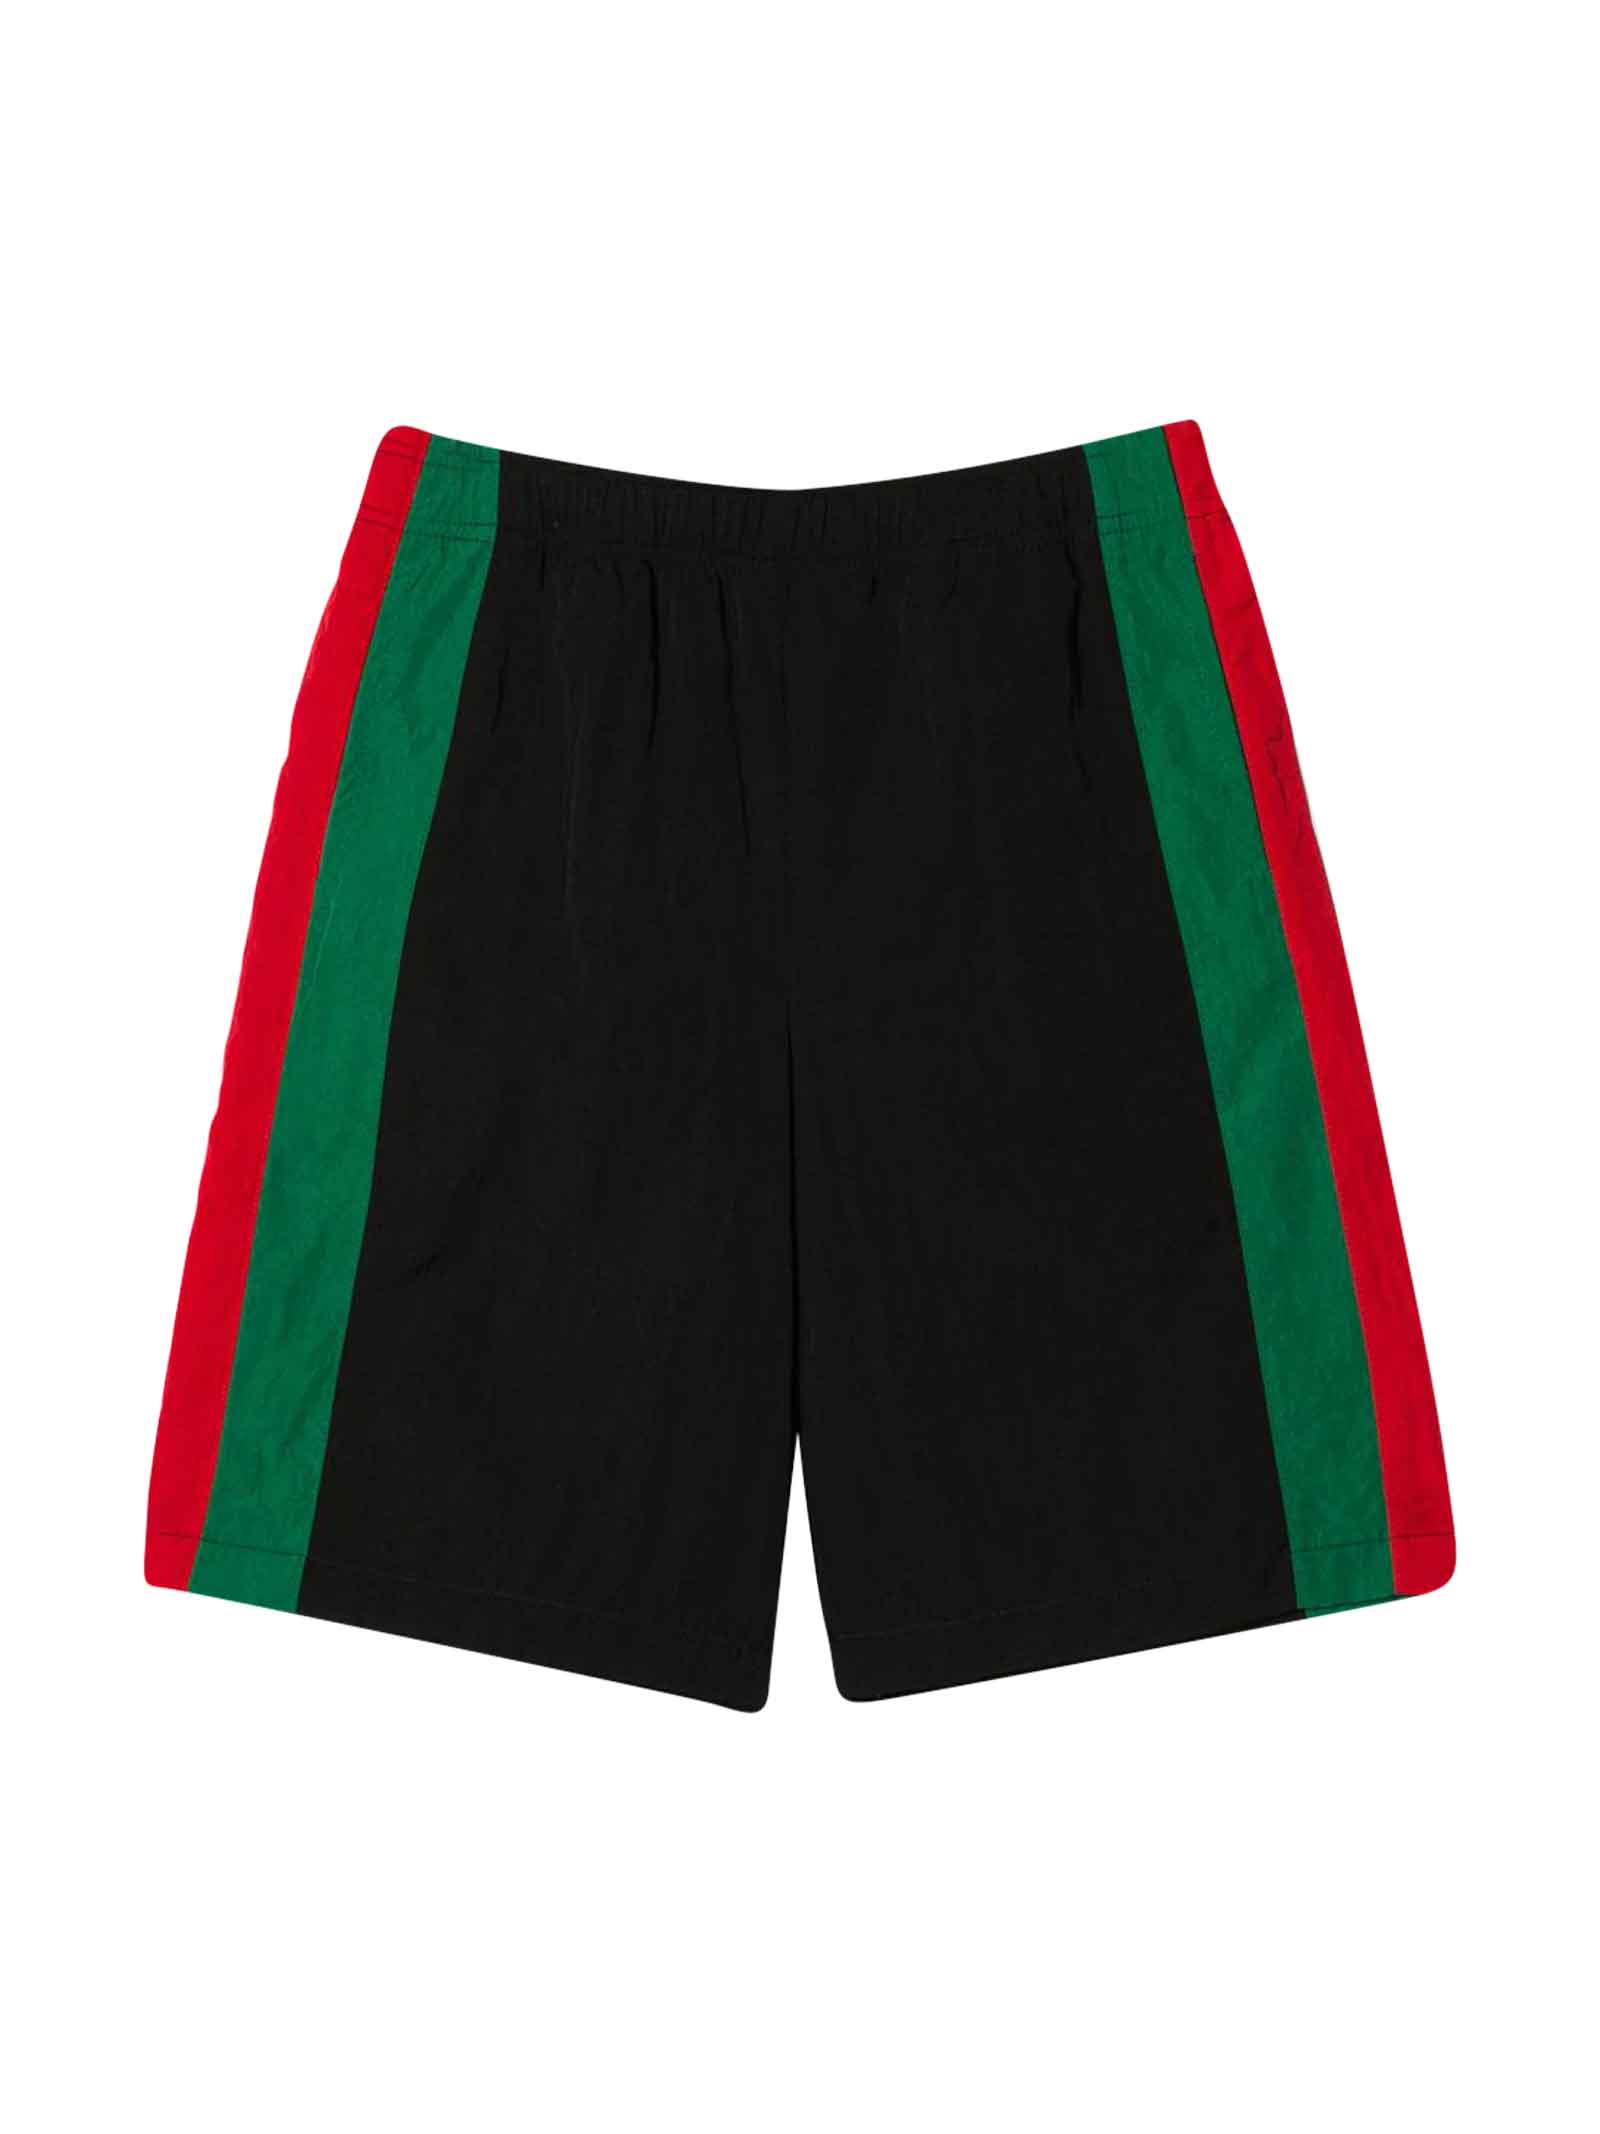 GUCCI SHORTS WITH MULTICOLOR STRIPES,591619XWAGV 1043